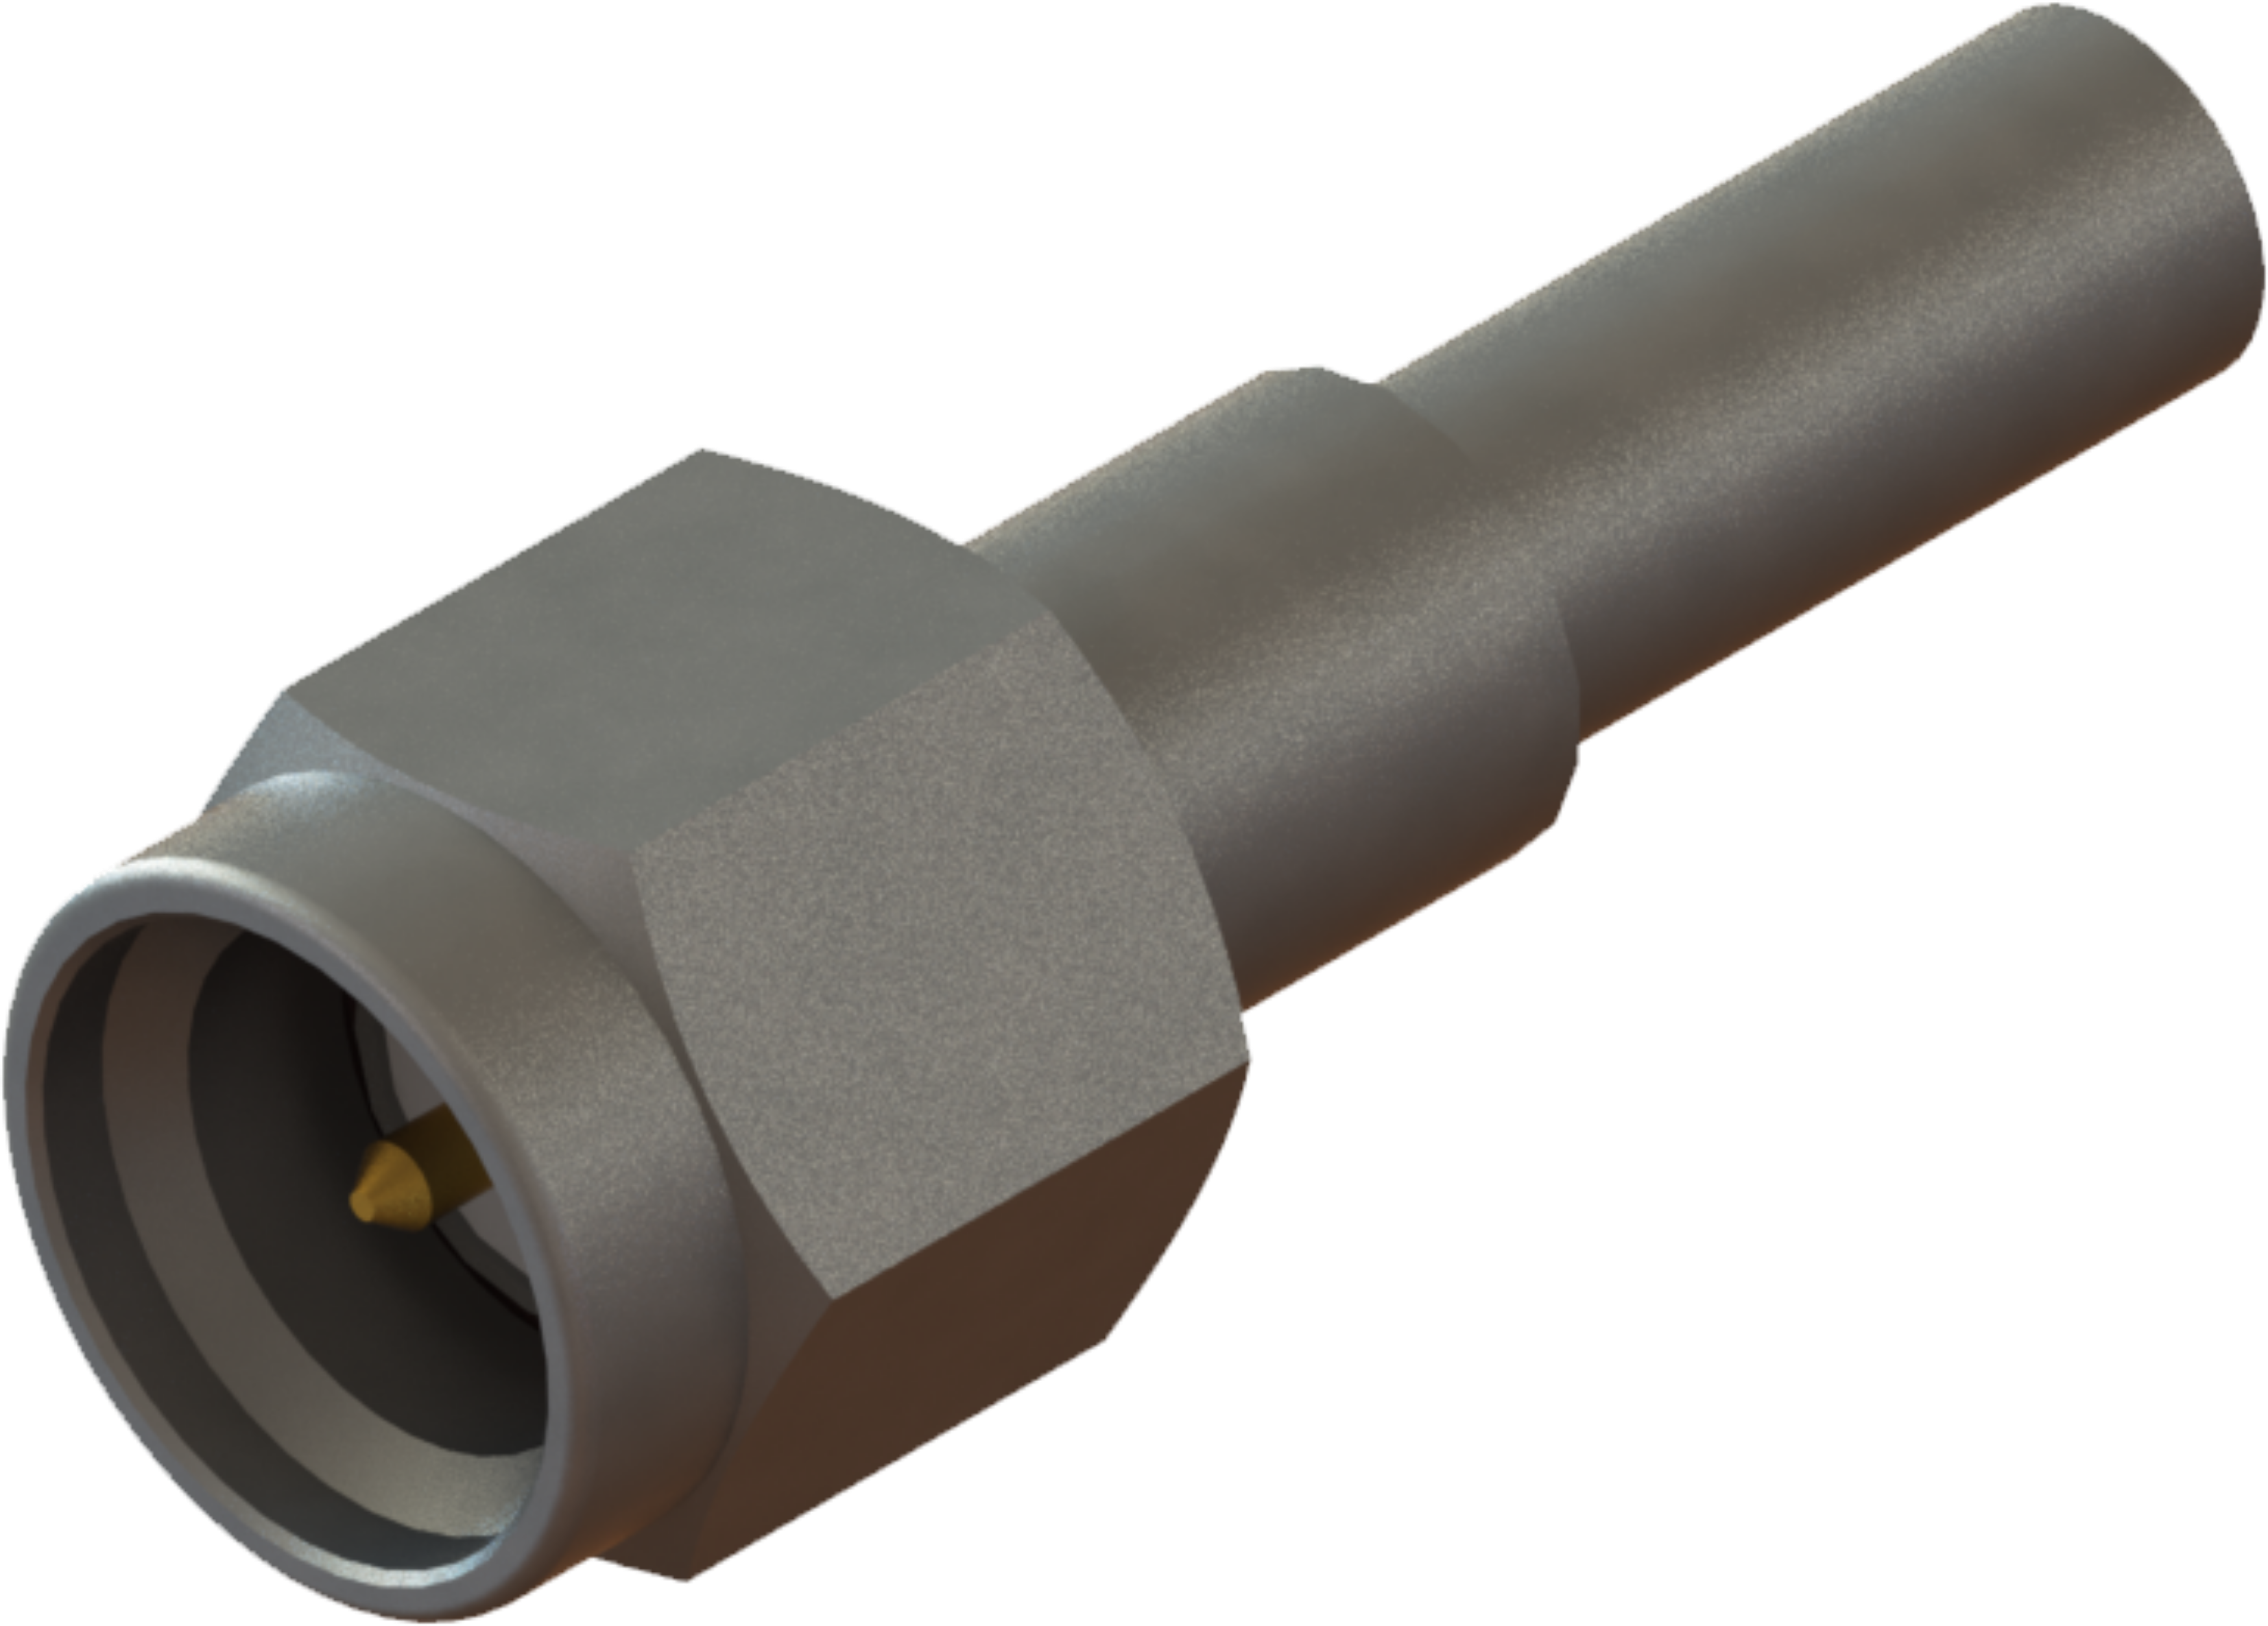 Picture of SMA Male Connector for RG-174 Cable